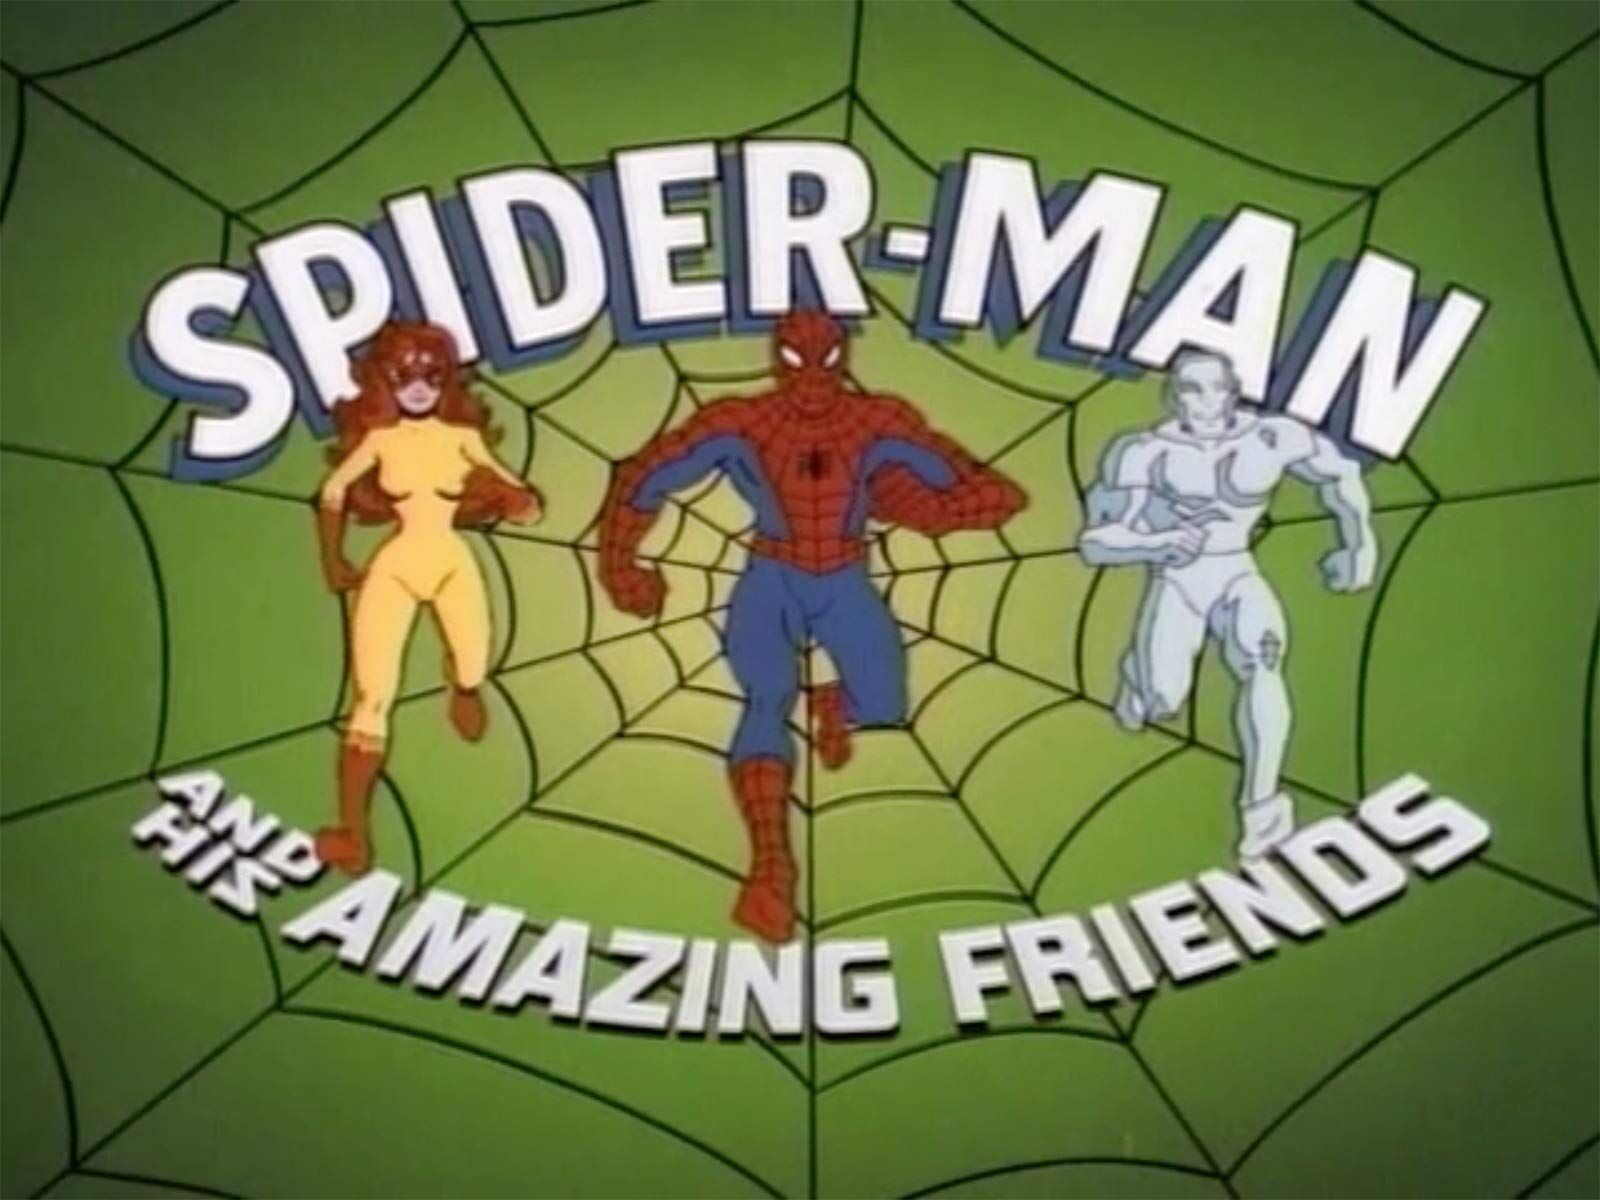 Spidey and His Amazing Friends: Icon - Officially Licensed Marvel